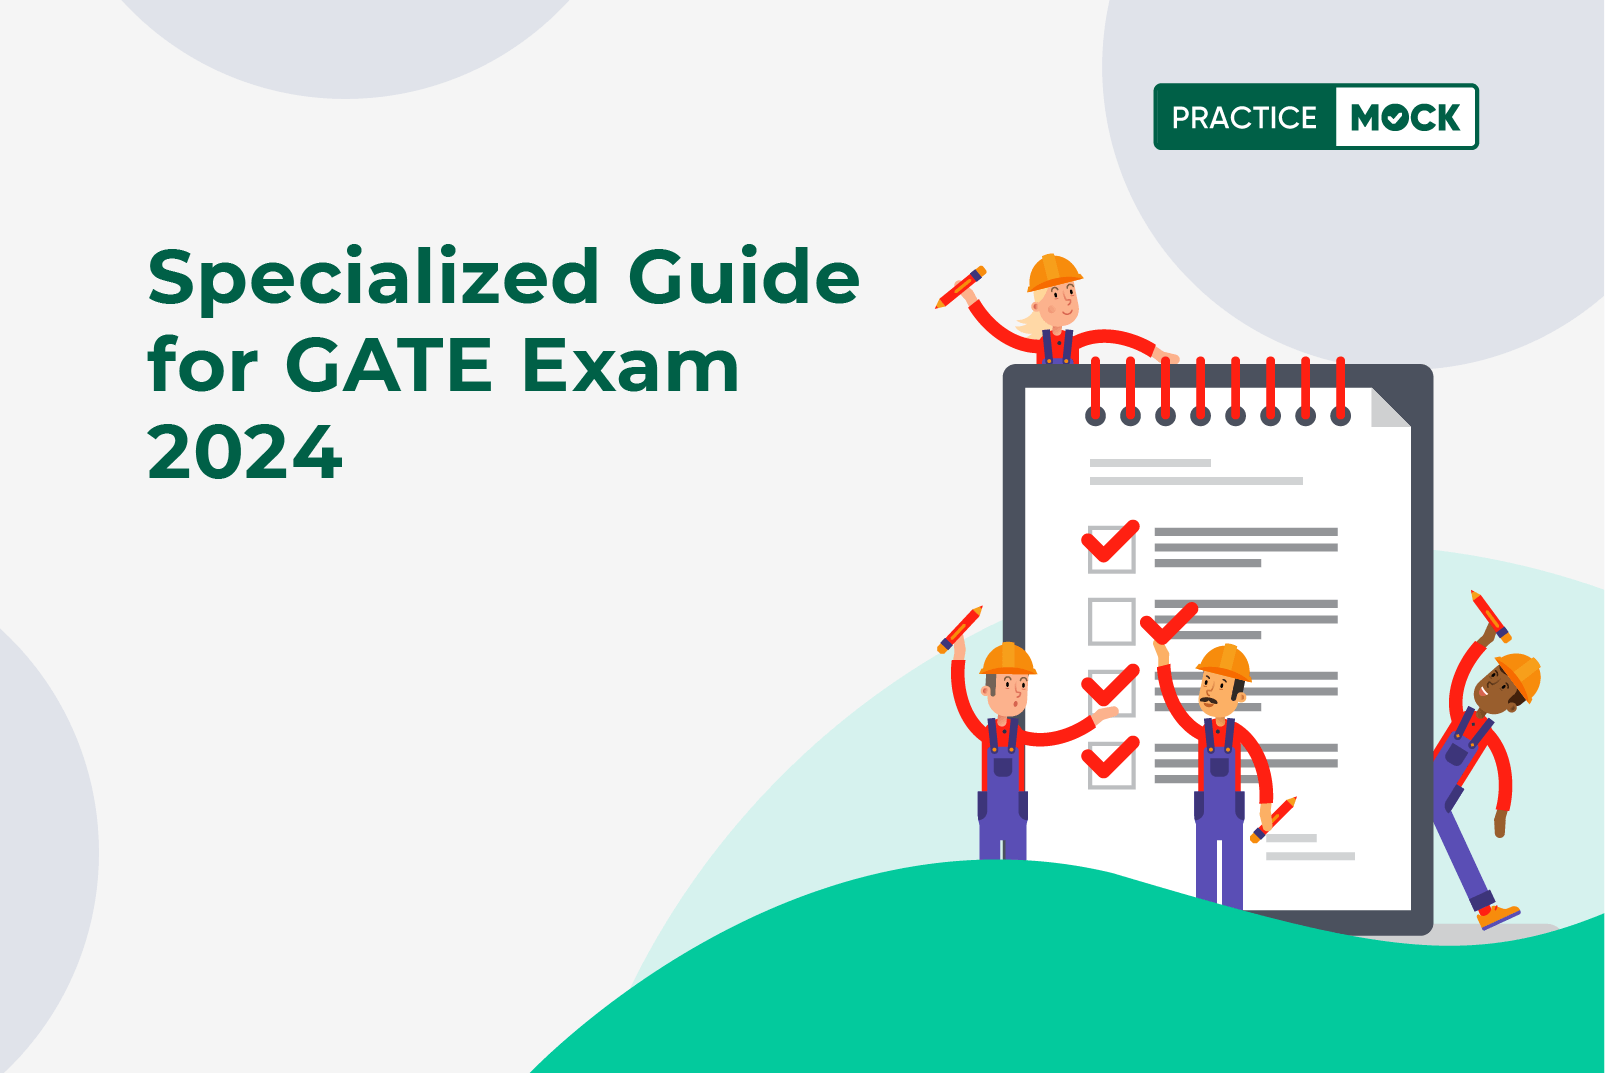 Specialized Guide for GATE Exam 2024. PracticeMock